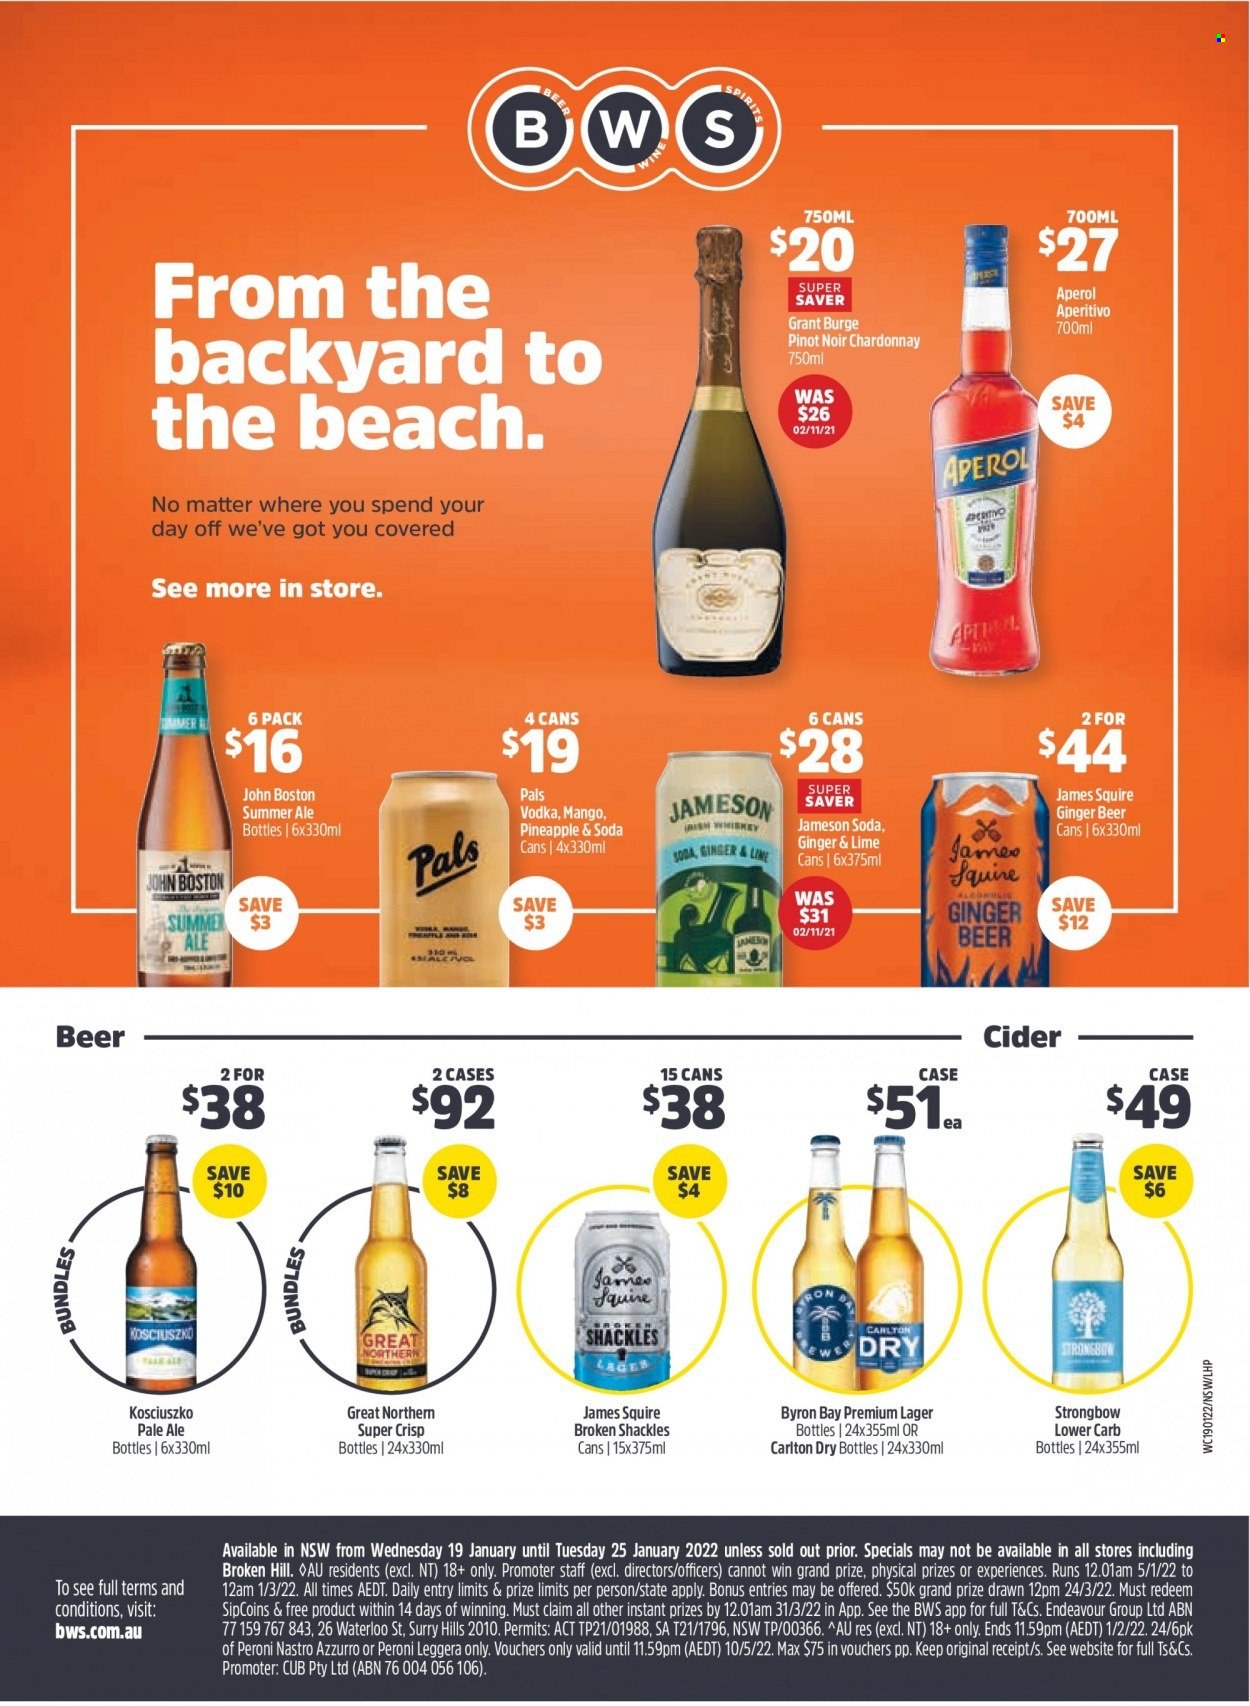 thumbnail - BWS Catalogue - 19 Jan 2022 - 25 Jan 2022 - Sales products - soda, red wine, white wine, Chardonnay, wine, Pinot Noir, vodka, whiskey, irish whiskey, Jameson, Aperol, whisky, cider, beer, Peroni, Lager, ginger beer. Page 1.